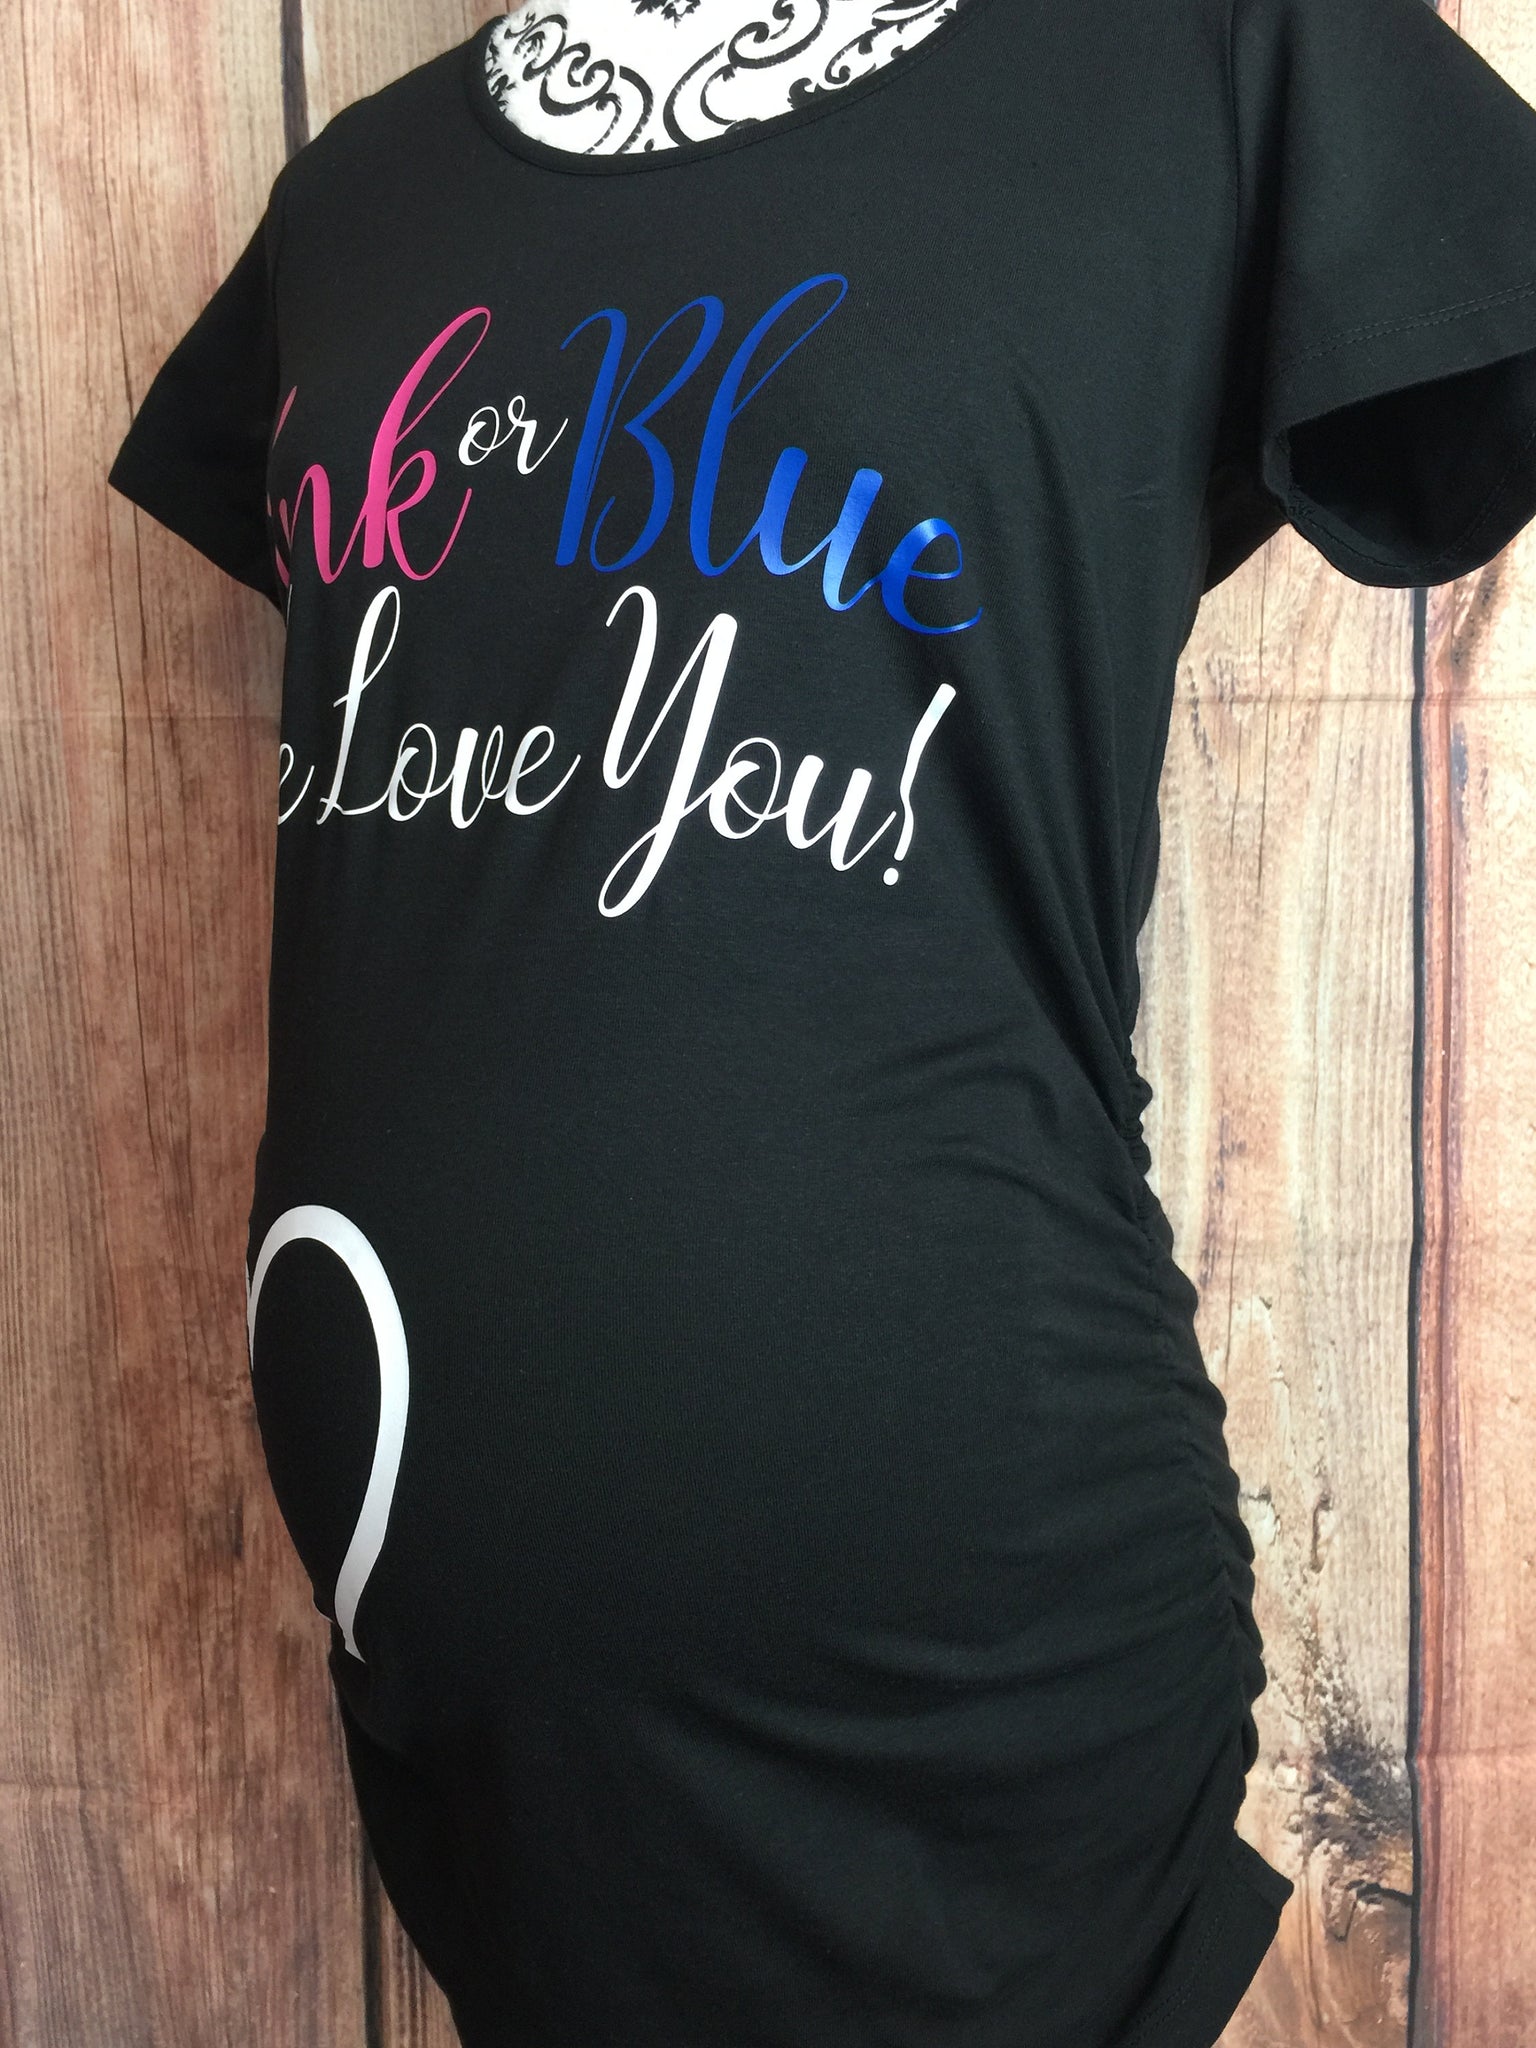 Download Pink Or Blue We Love You Couples Gender Reveal Shirts Pink Or Blue Gen Lili S Creative Designs